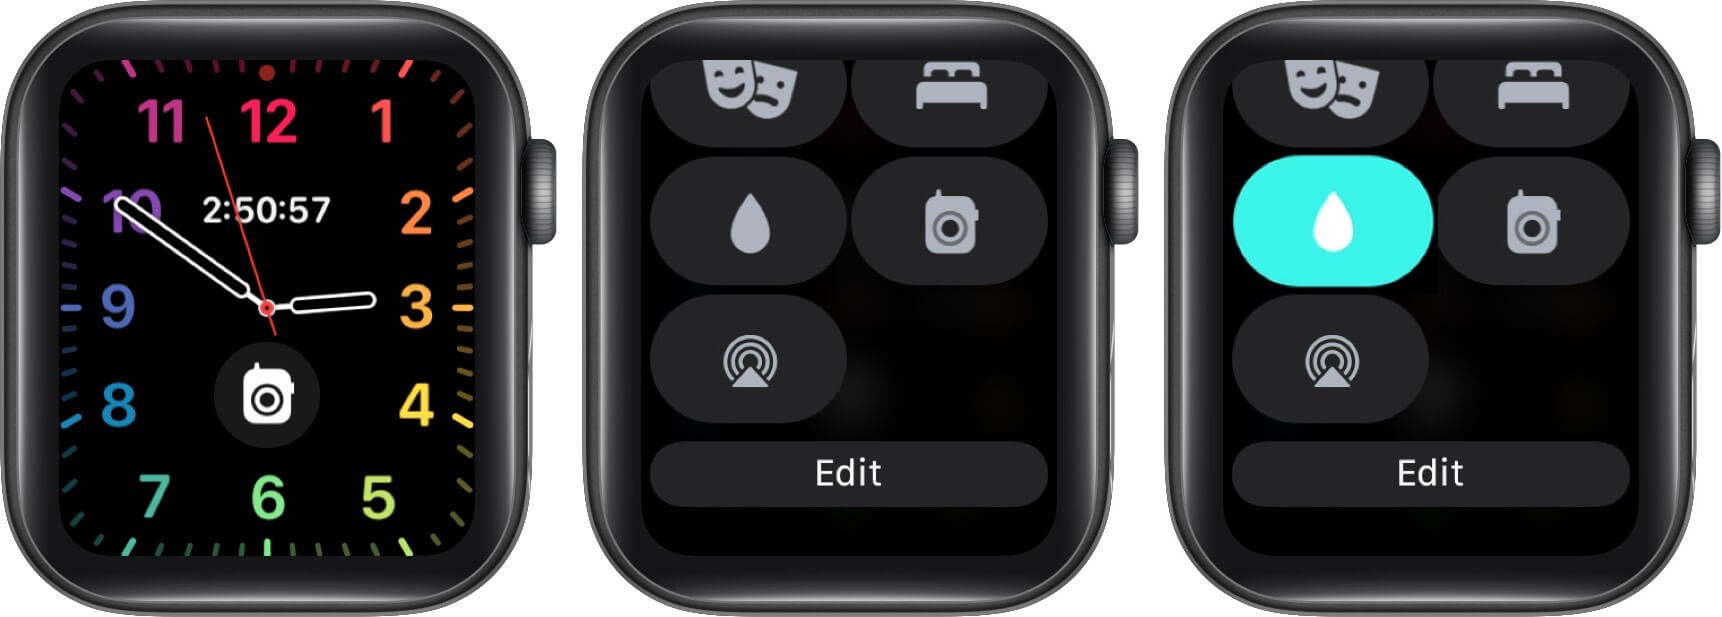 How to Use Apple Watch's Water Lock? 